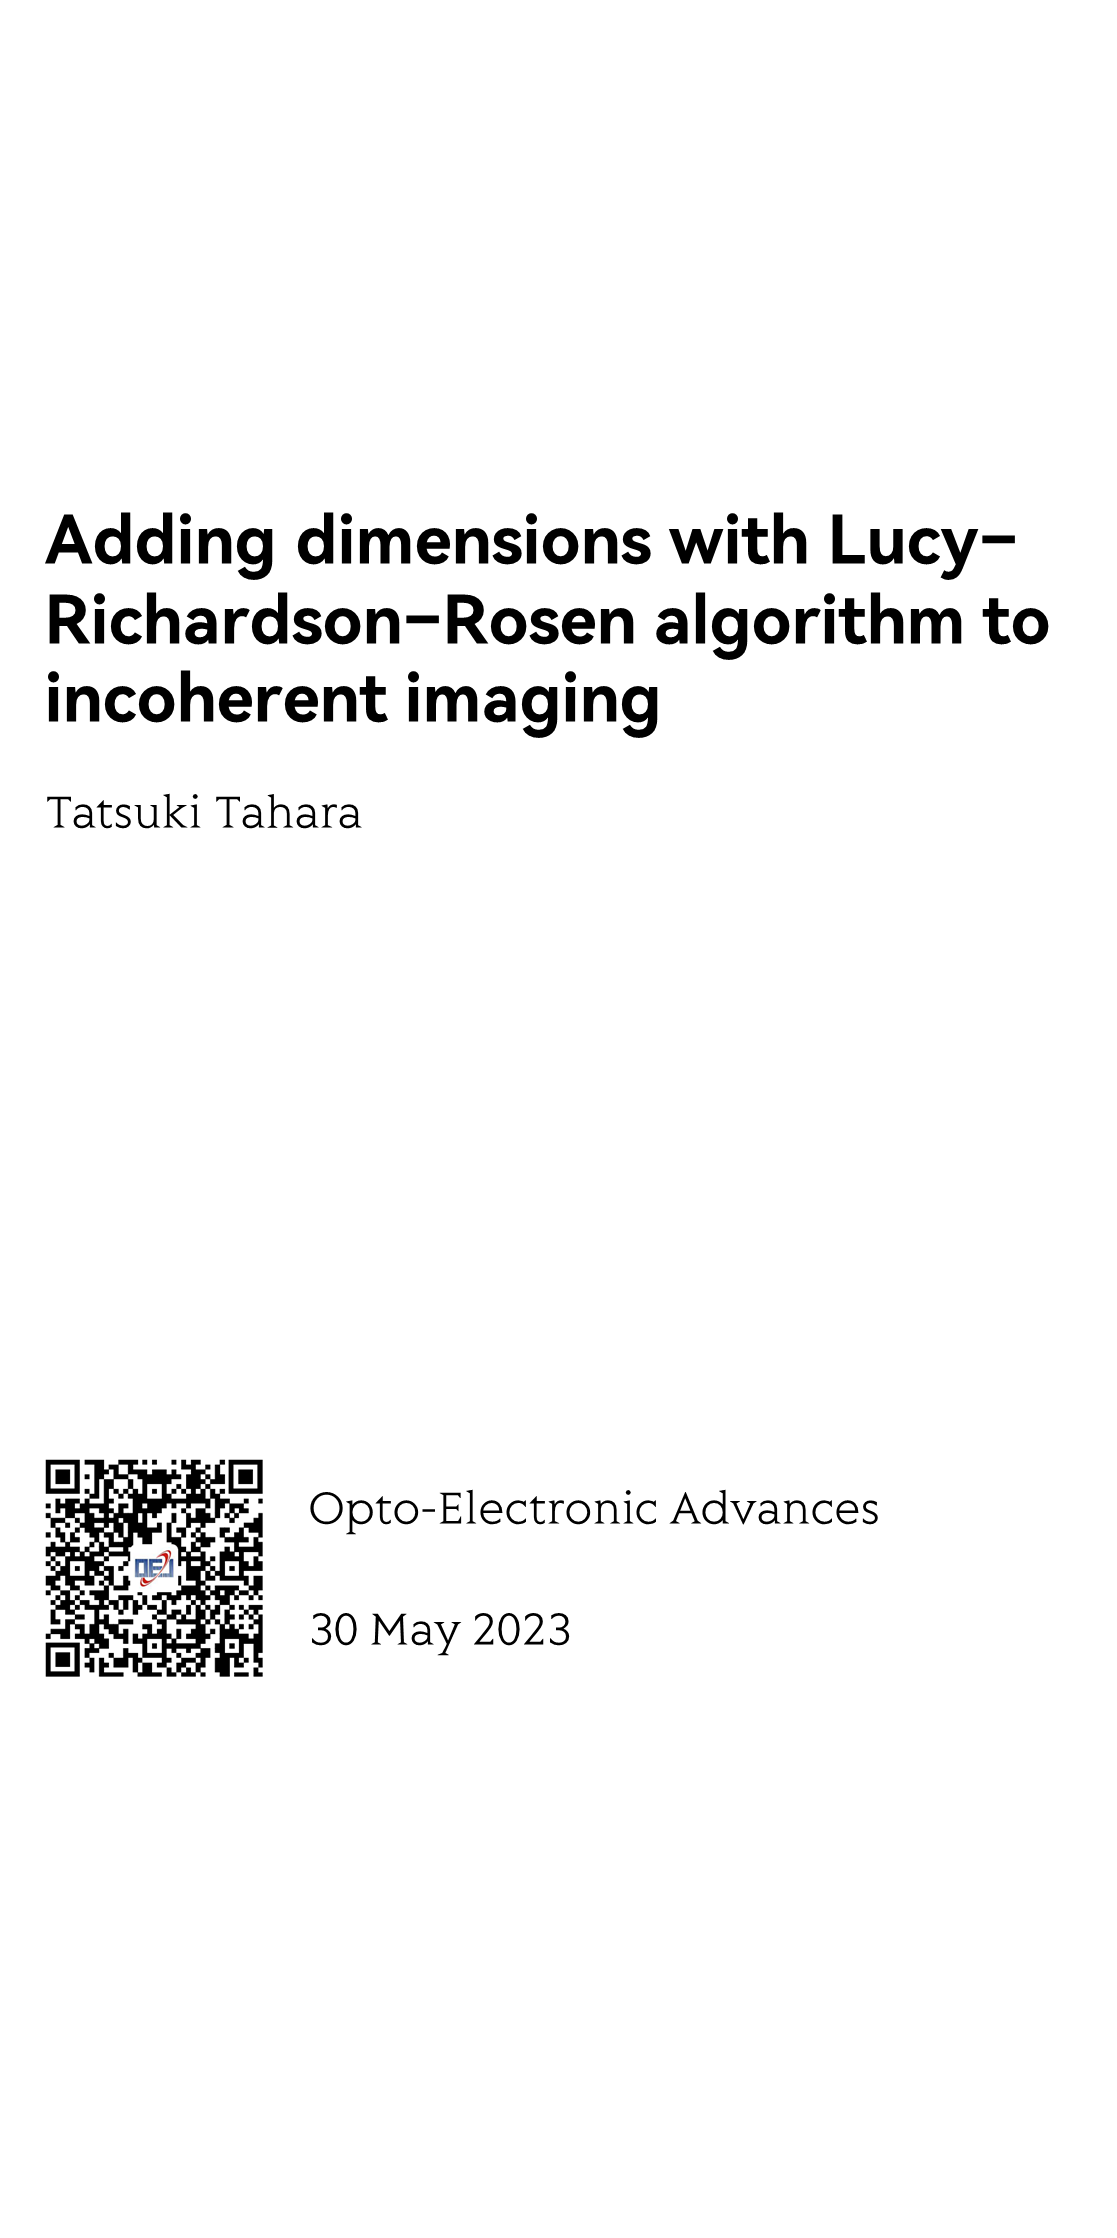 Adding dimensions with Lucy–Richardson–Rosen algorithm to incoherent imaging_1